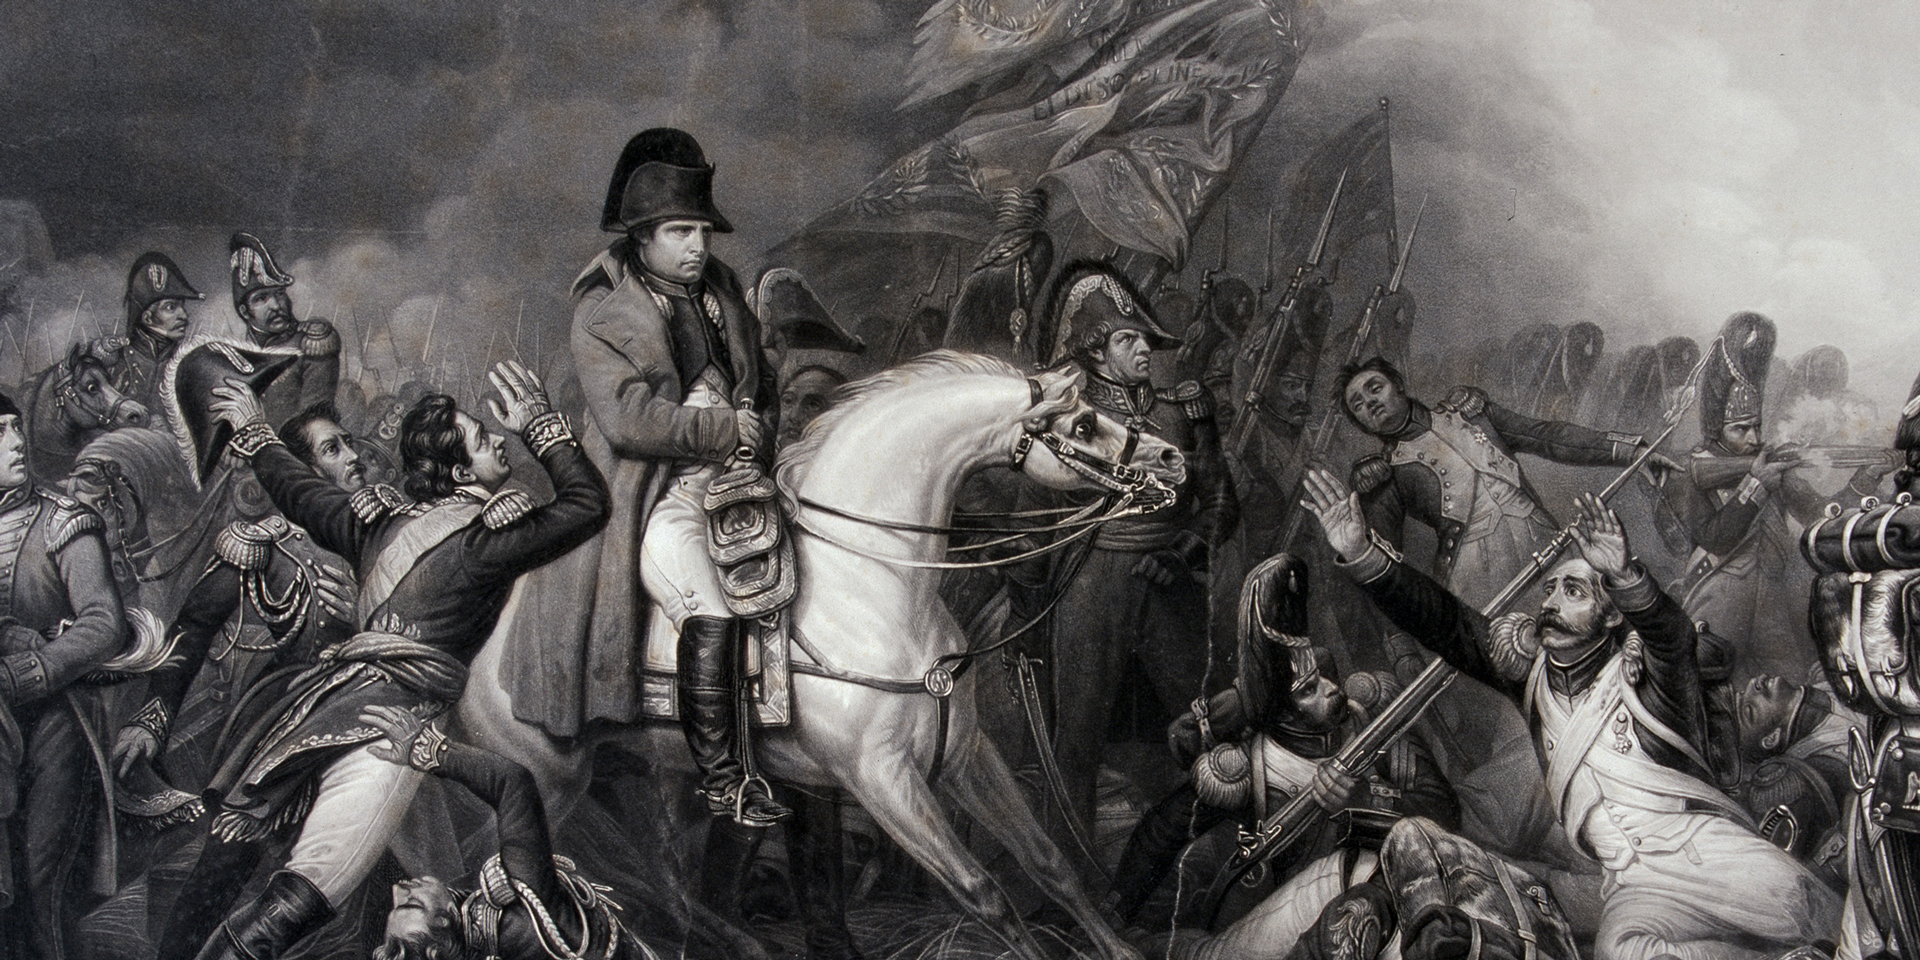 The Battle Of Waterloo: How The French Won (Or Think They Did